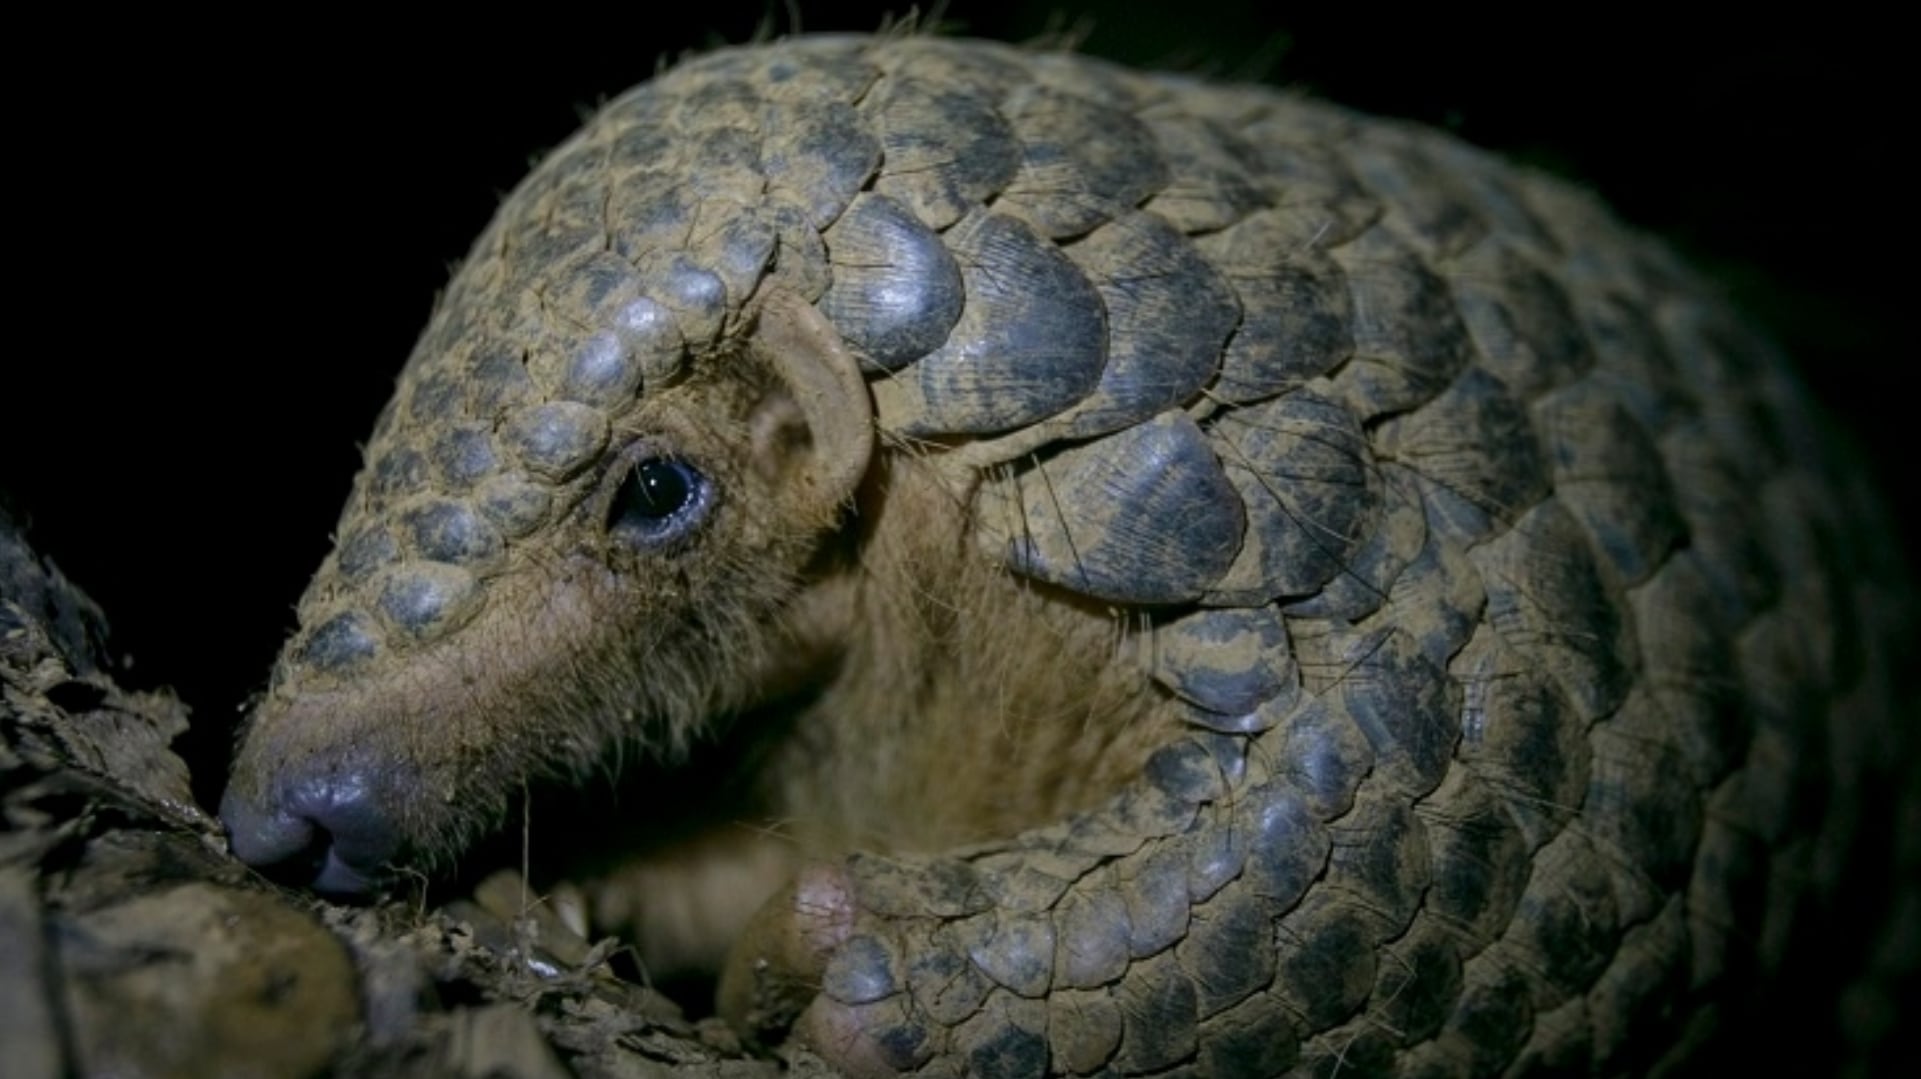 Pakistan's pangolins imperiled as illegal wildlife trade with China flourishes - Firstpost